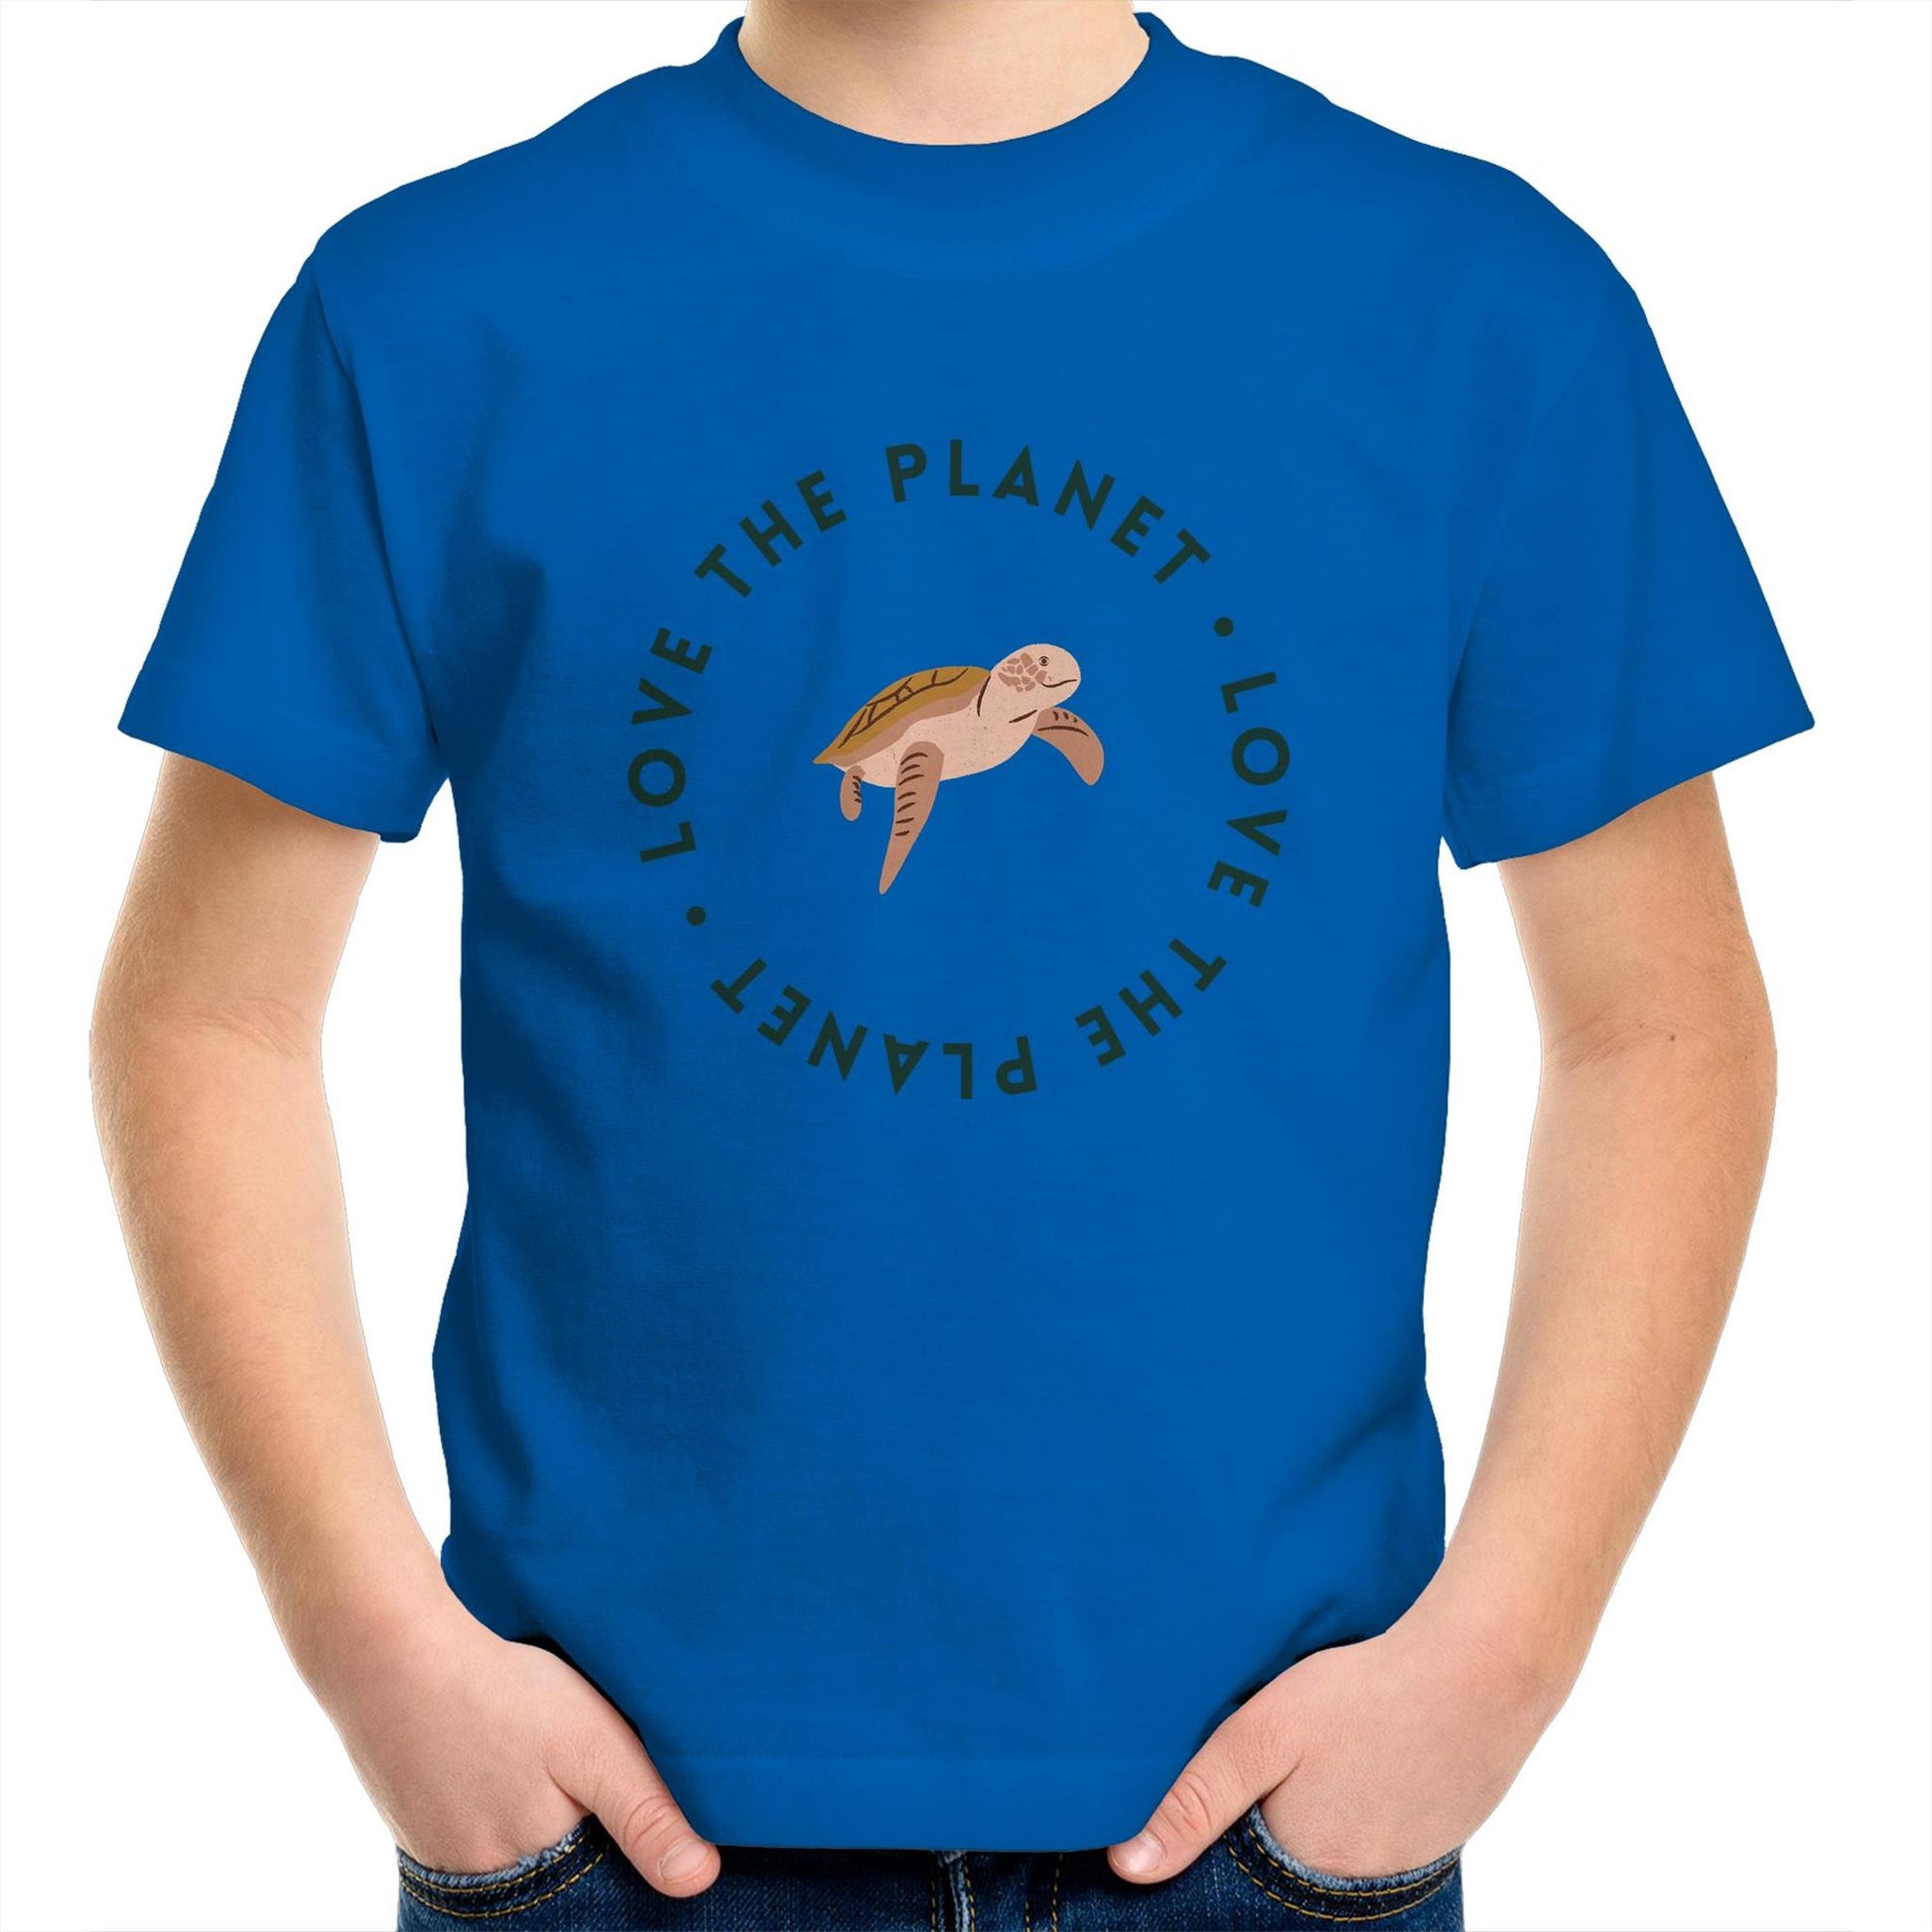 Love The Planet - Kids Youth Crew T-Shirt Bright Royal Kids Youth T-shirt animal Environment